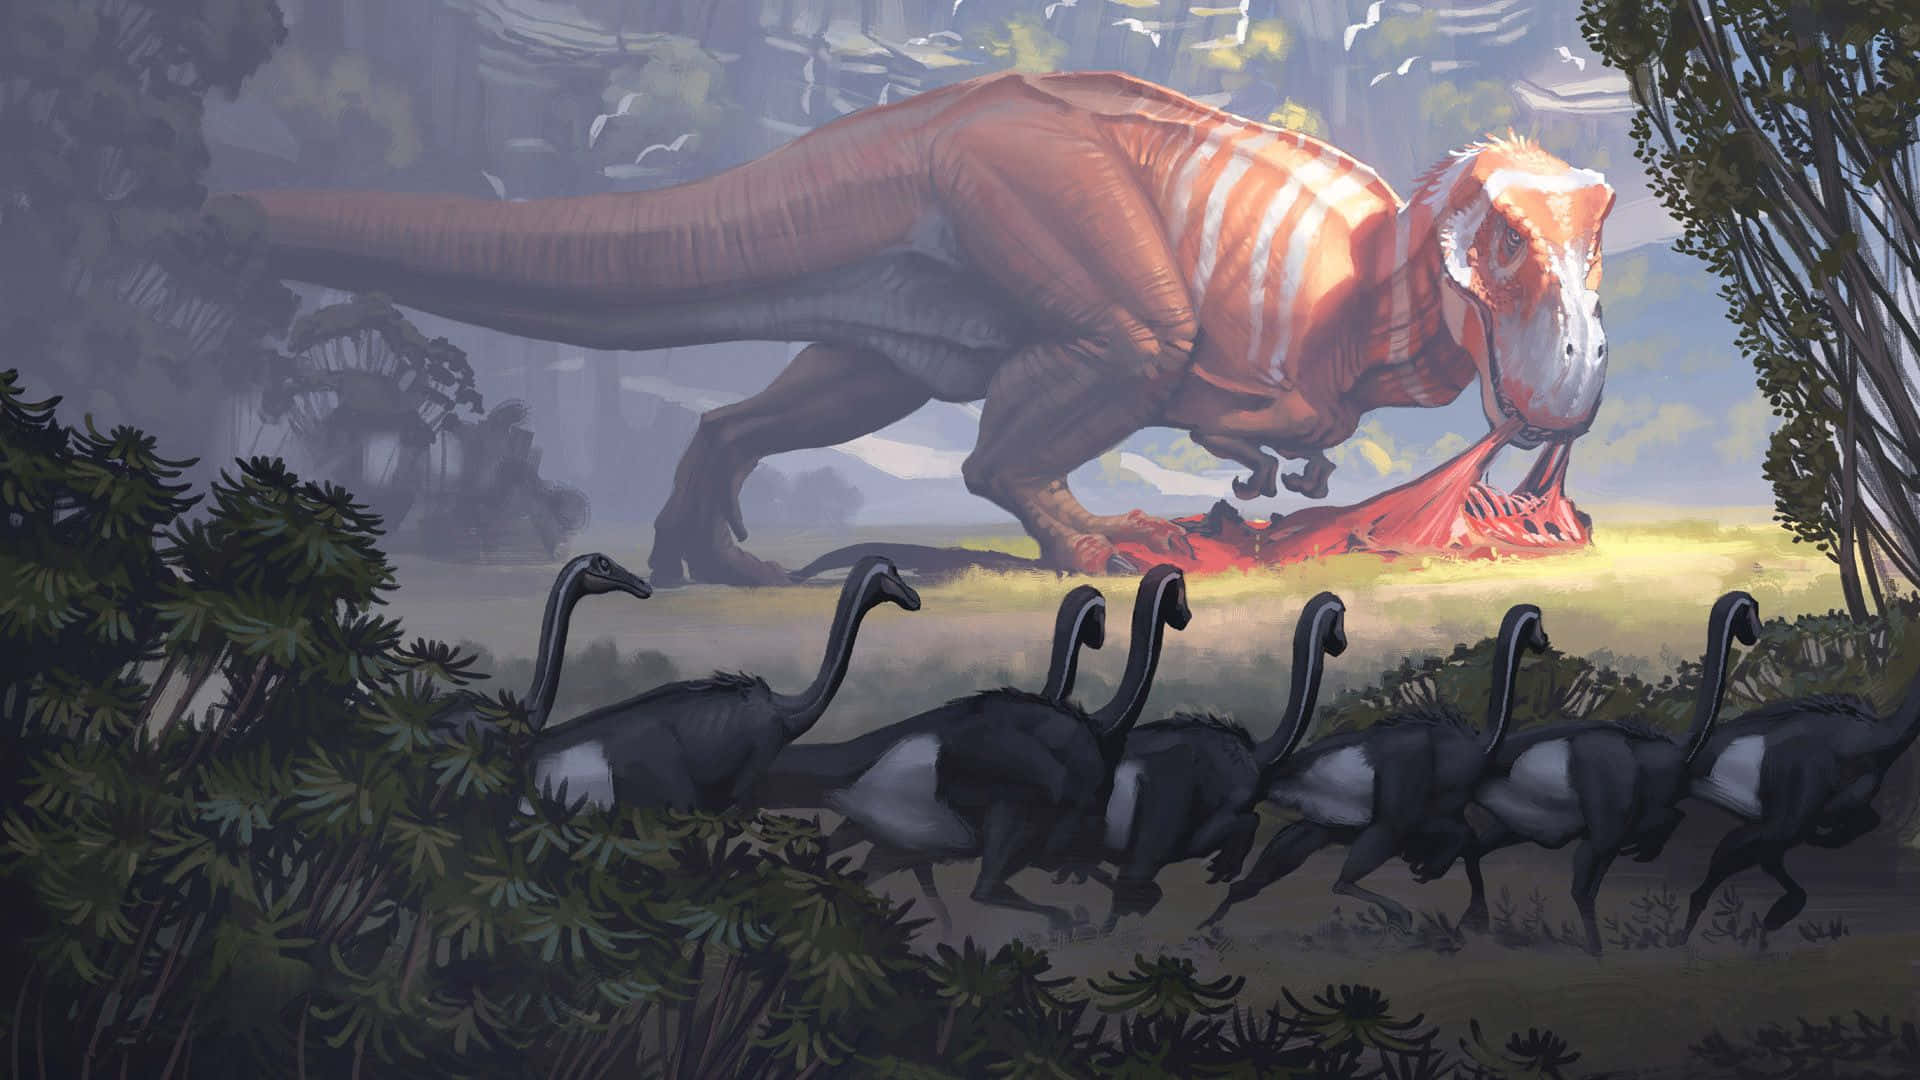 Get Ready to Explore the Prehistoric World of "Cool Dinosaur" Wallpaper